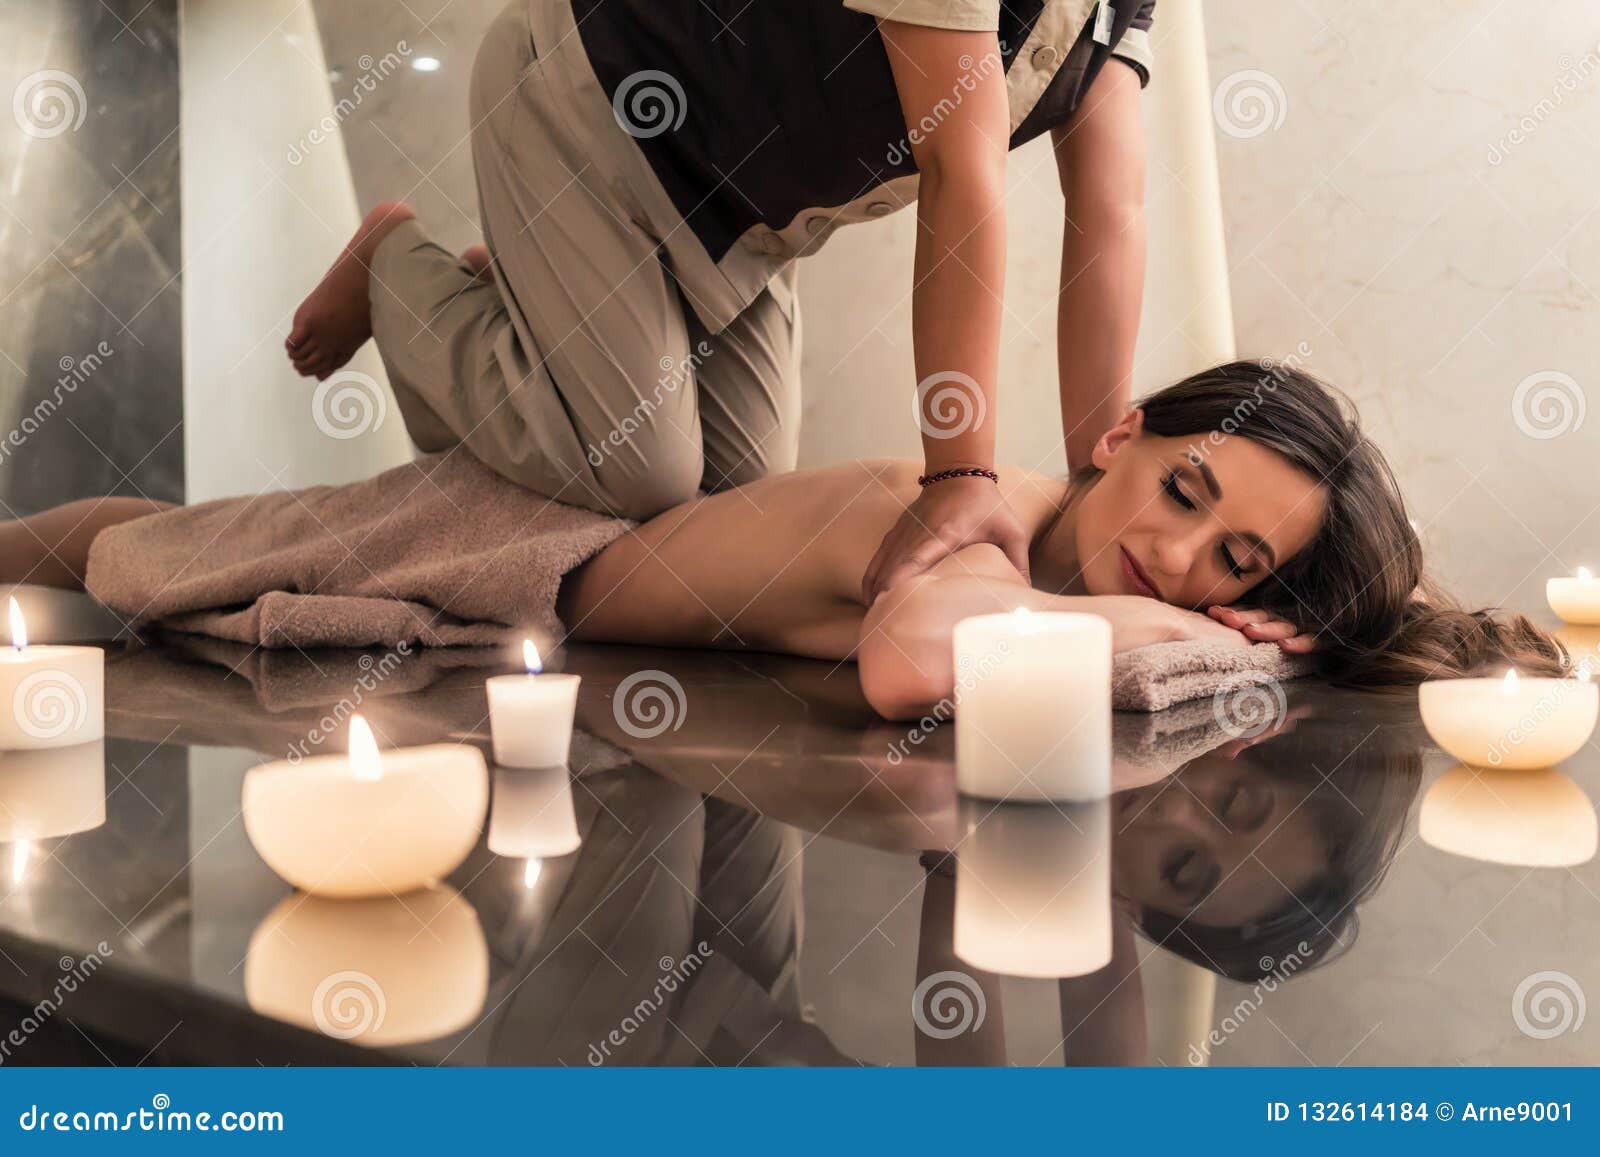 young woman enjoying the acupressure techniques of thai massage